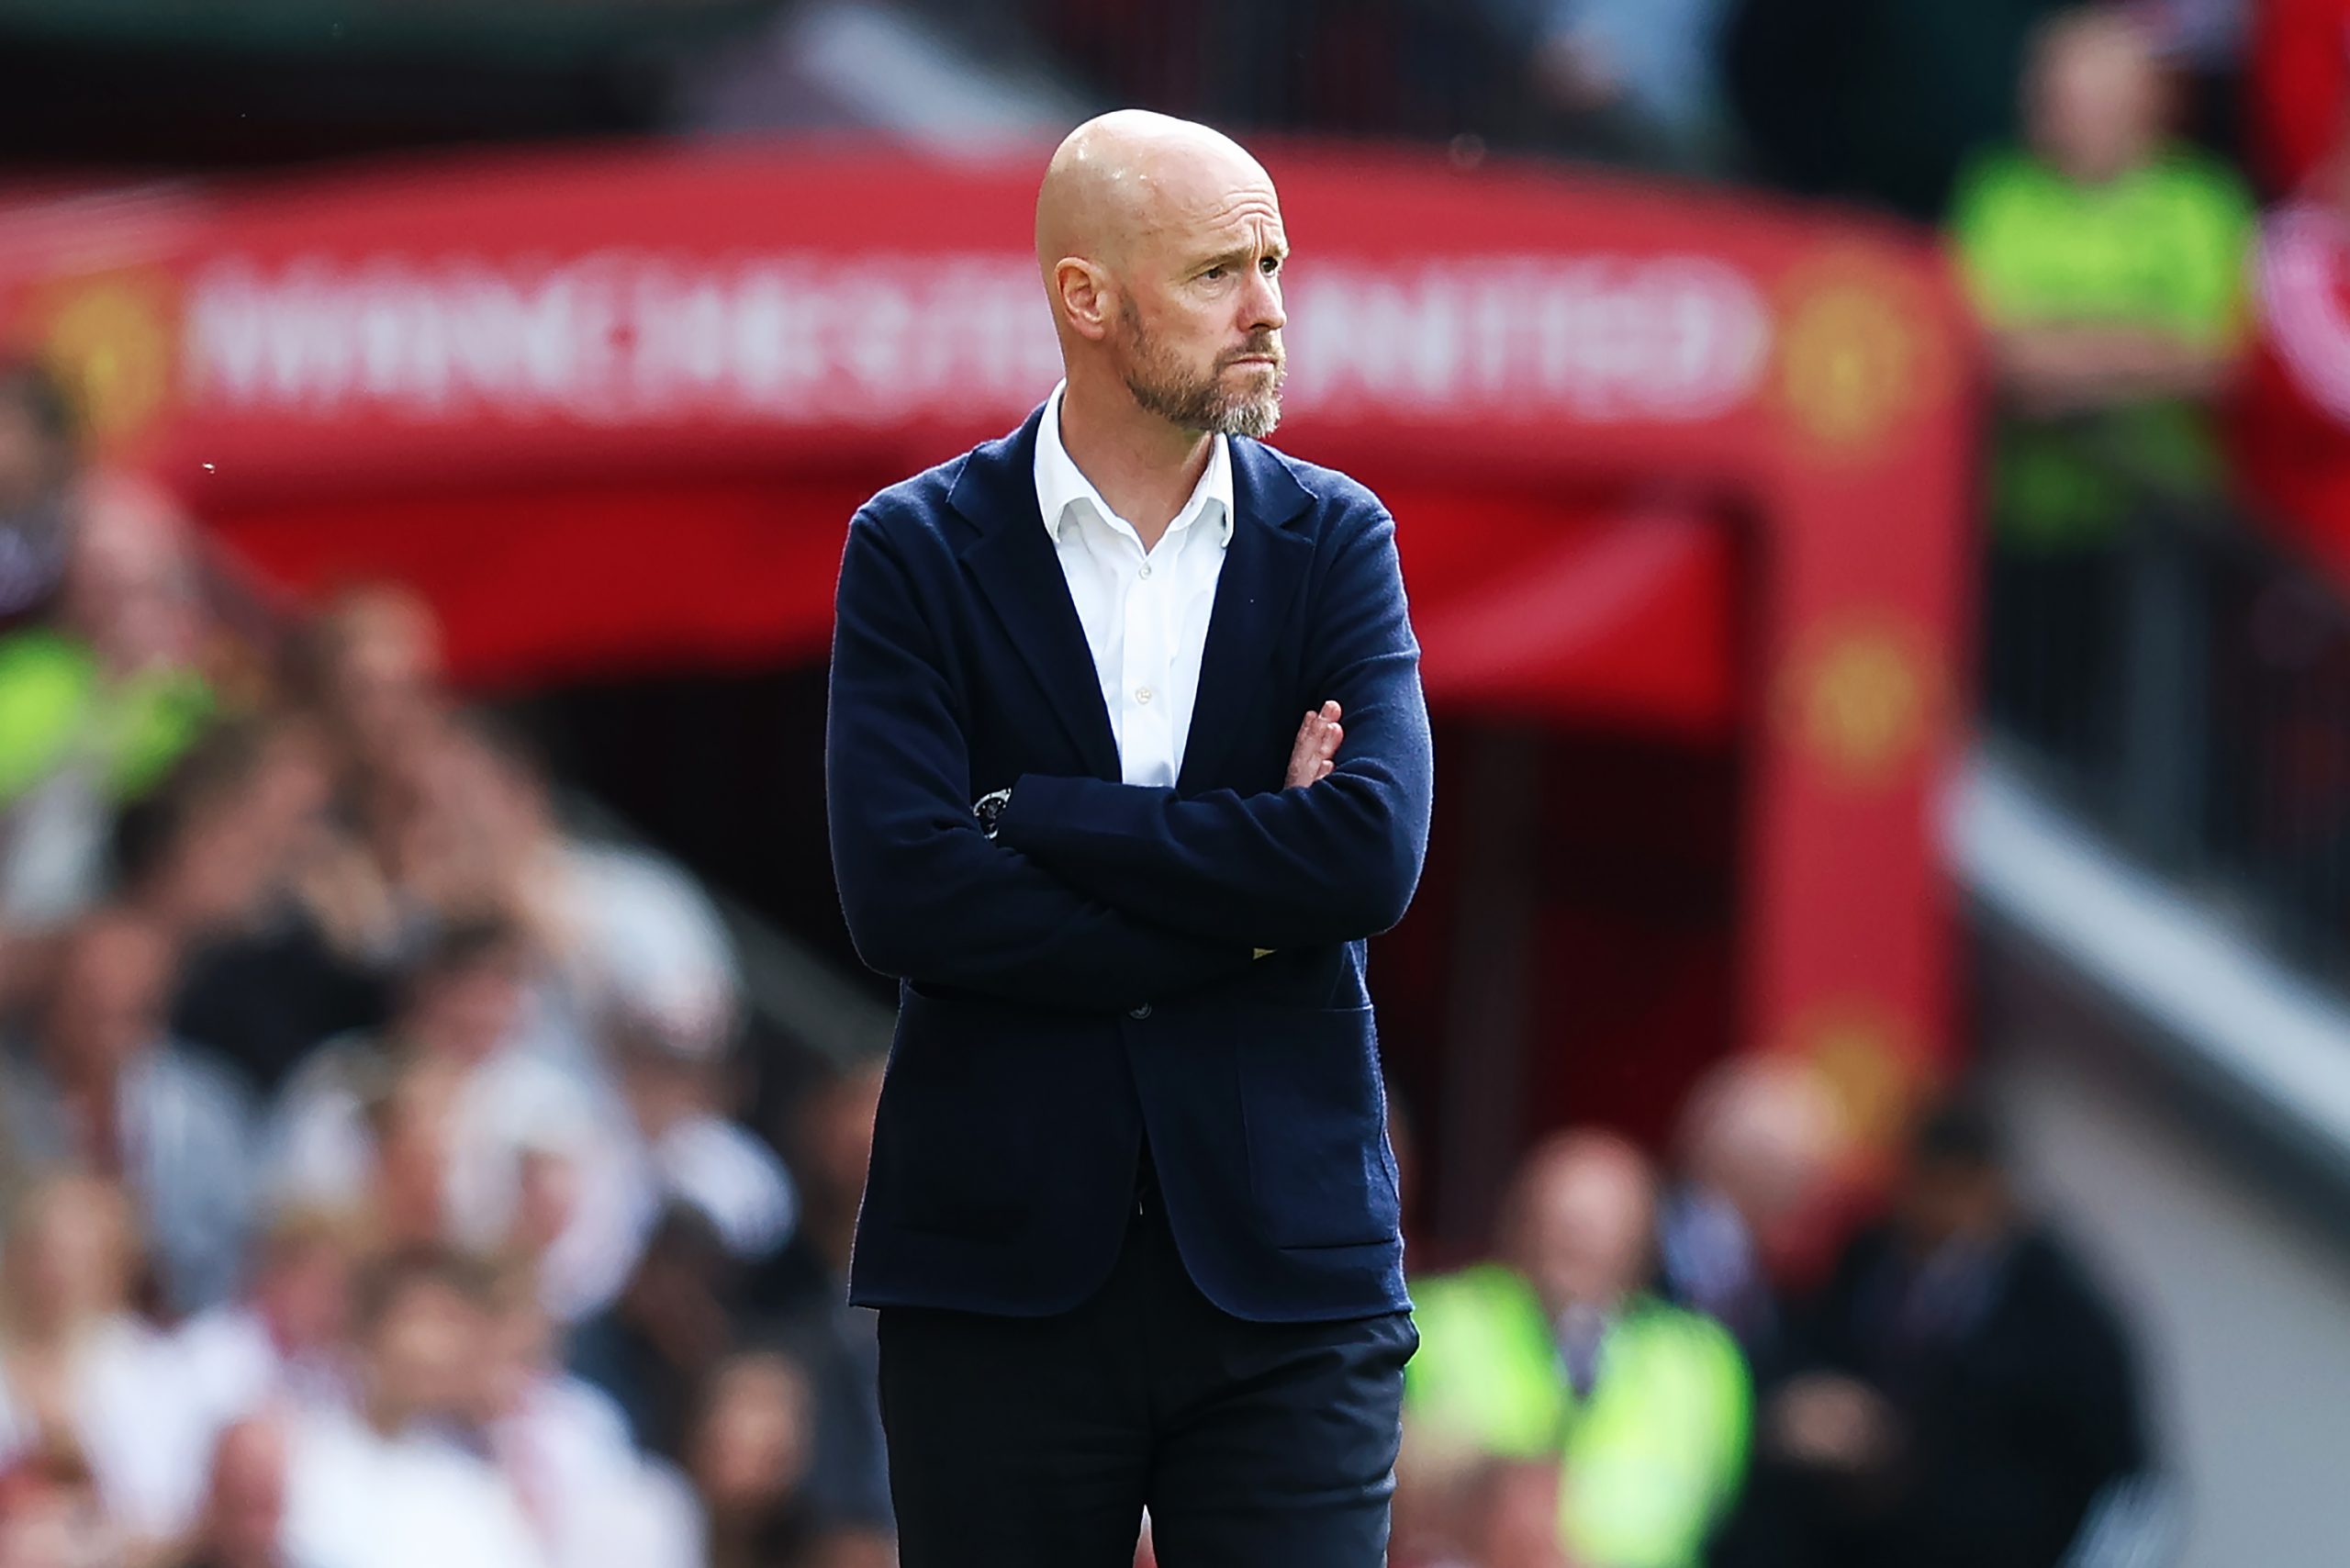 Manchester United boss Erik ten Hag is buoyed by the comeback win against Brentford on Saturday.